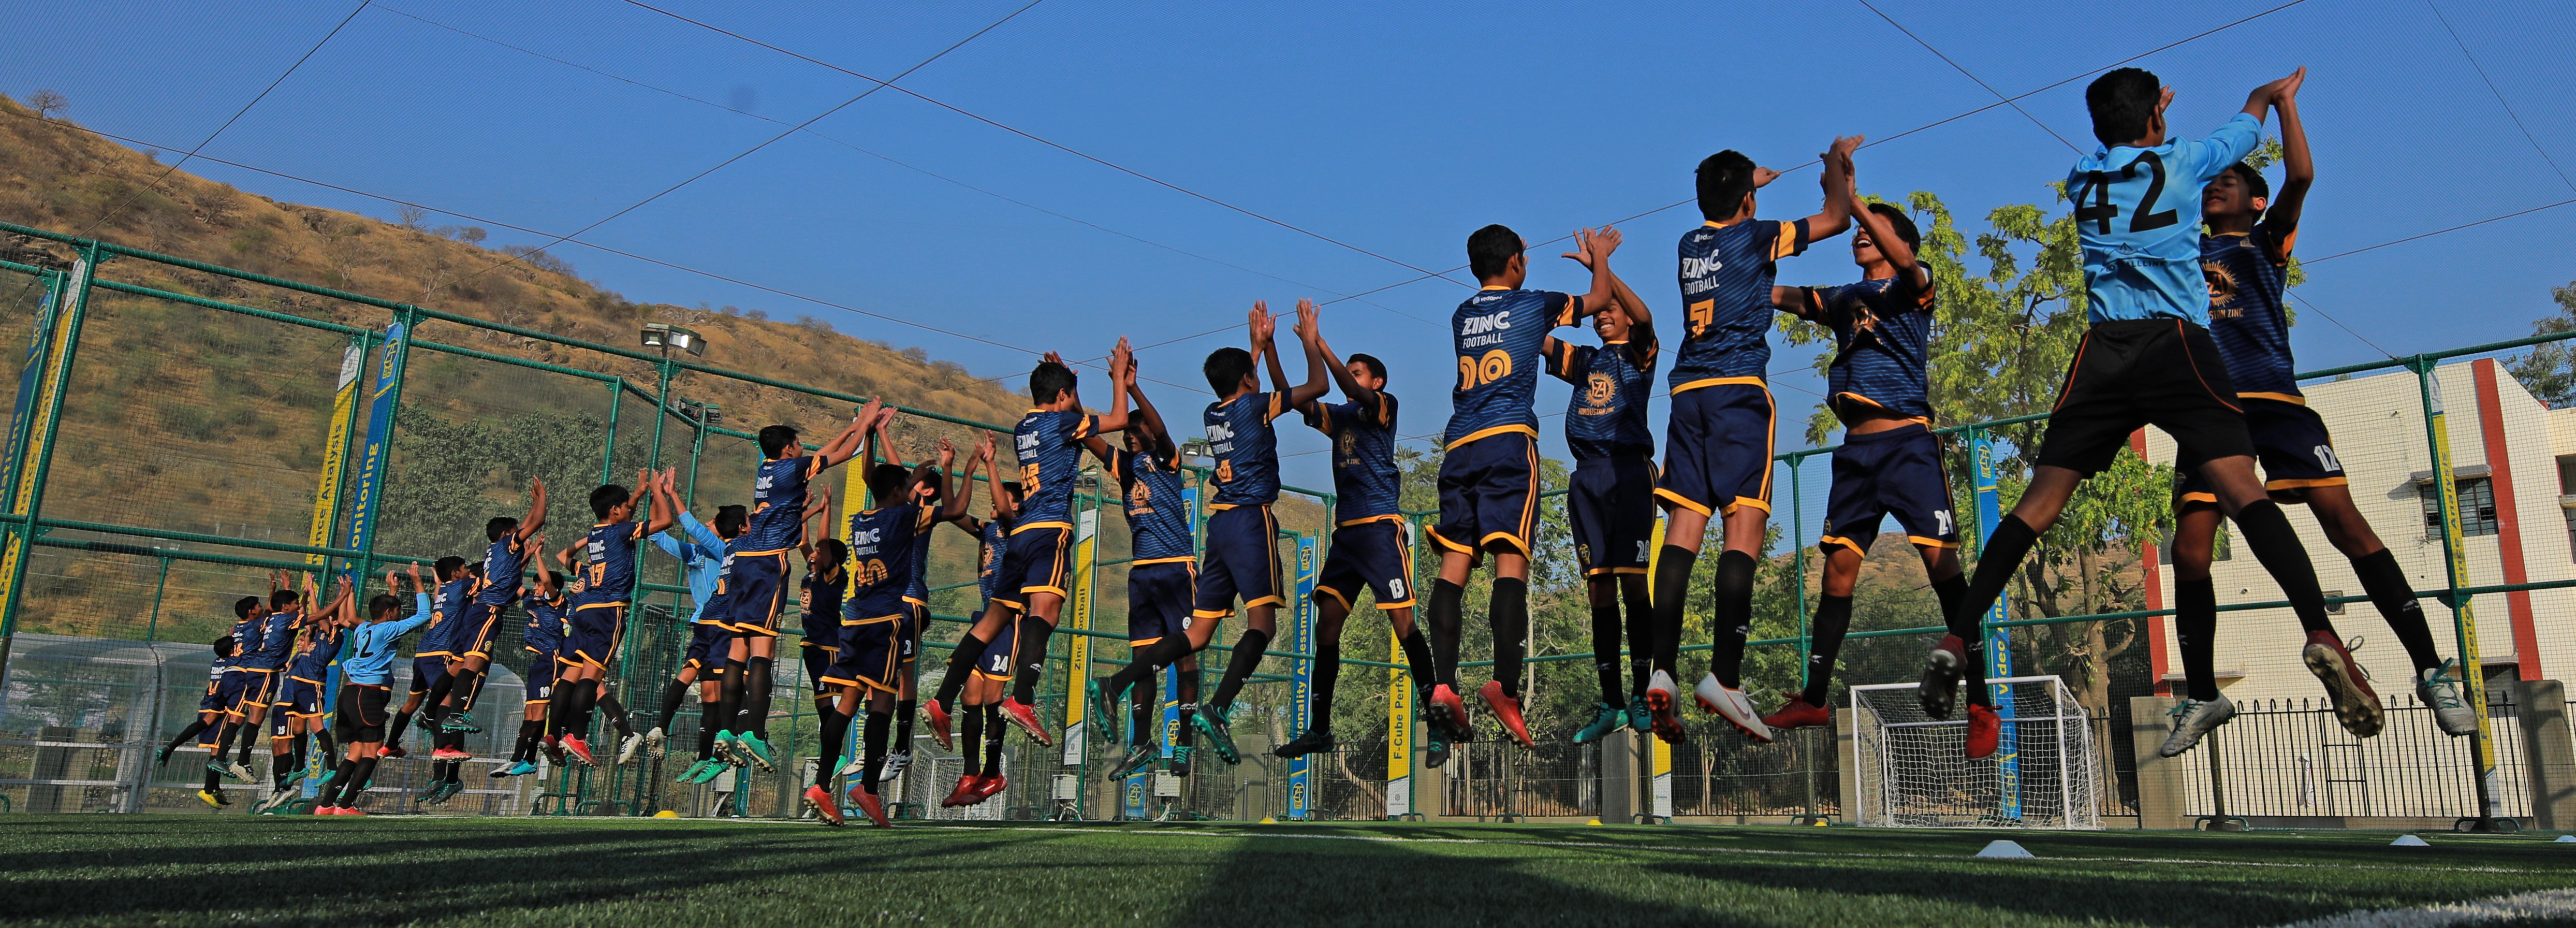 HISTORIC DAY FOR RAJASTHAN AS ZINC FOOTBALL ACADEMY BAGS AIFF'S TOPMOST 'ELITE 3 STAR RATING'